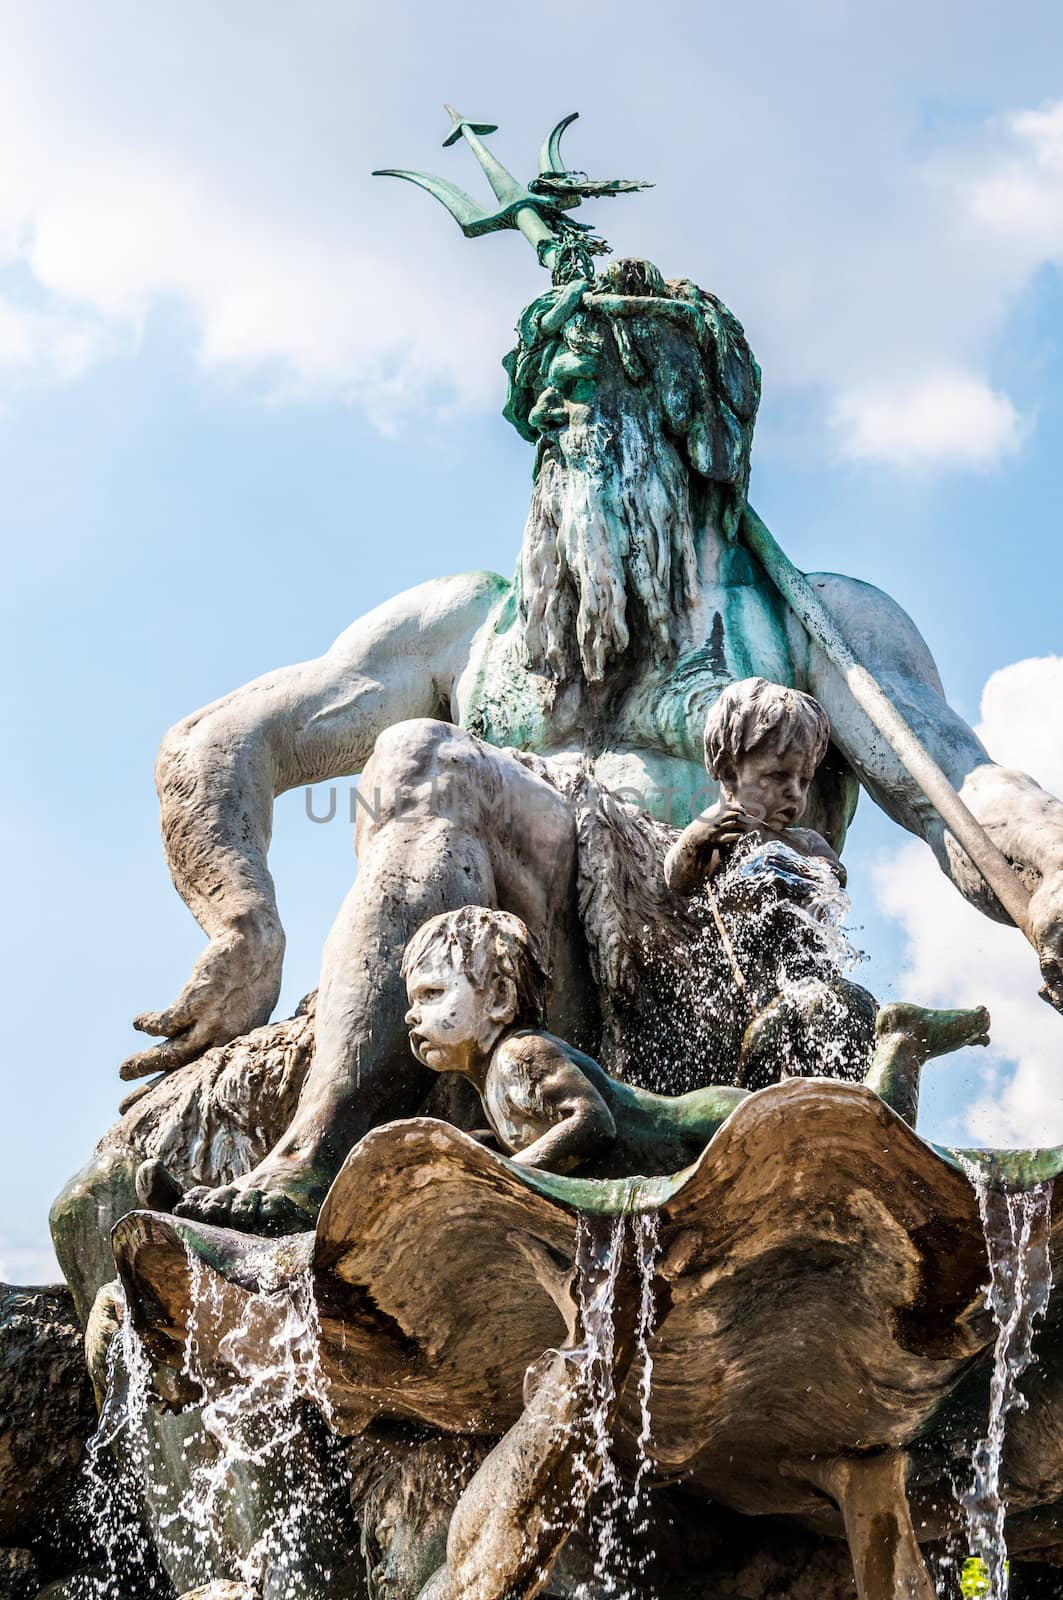 part of the neptune fountain in Berlin